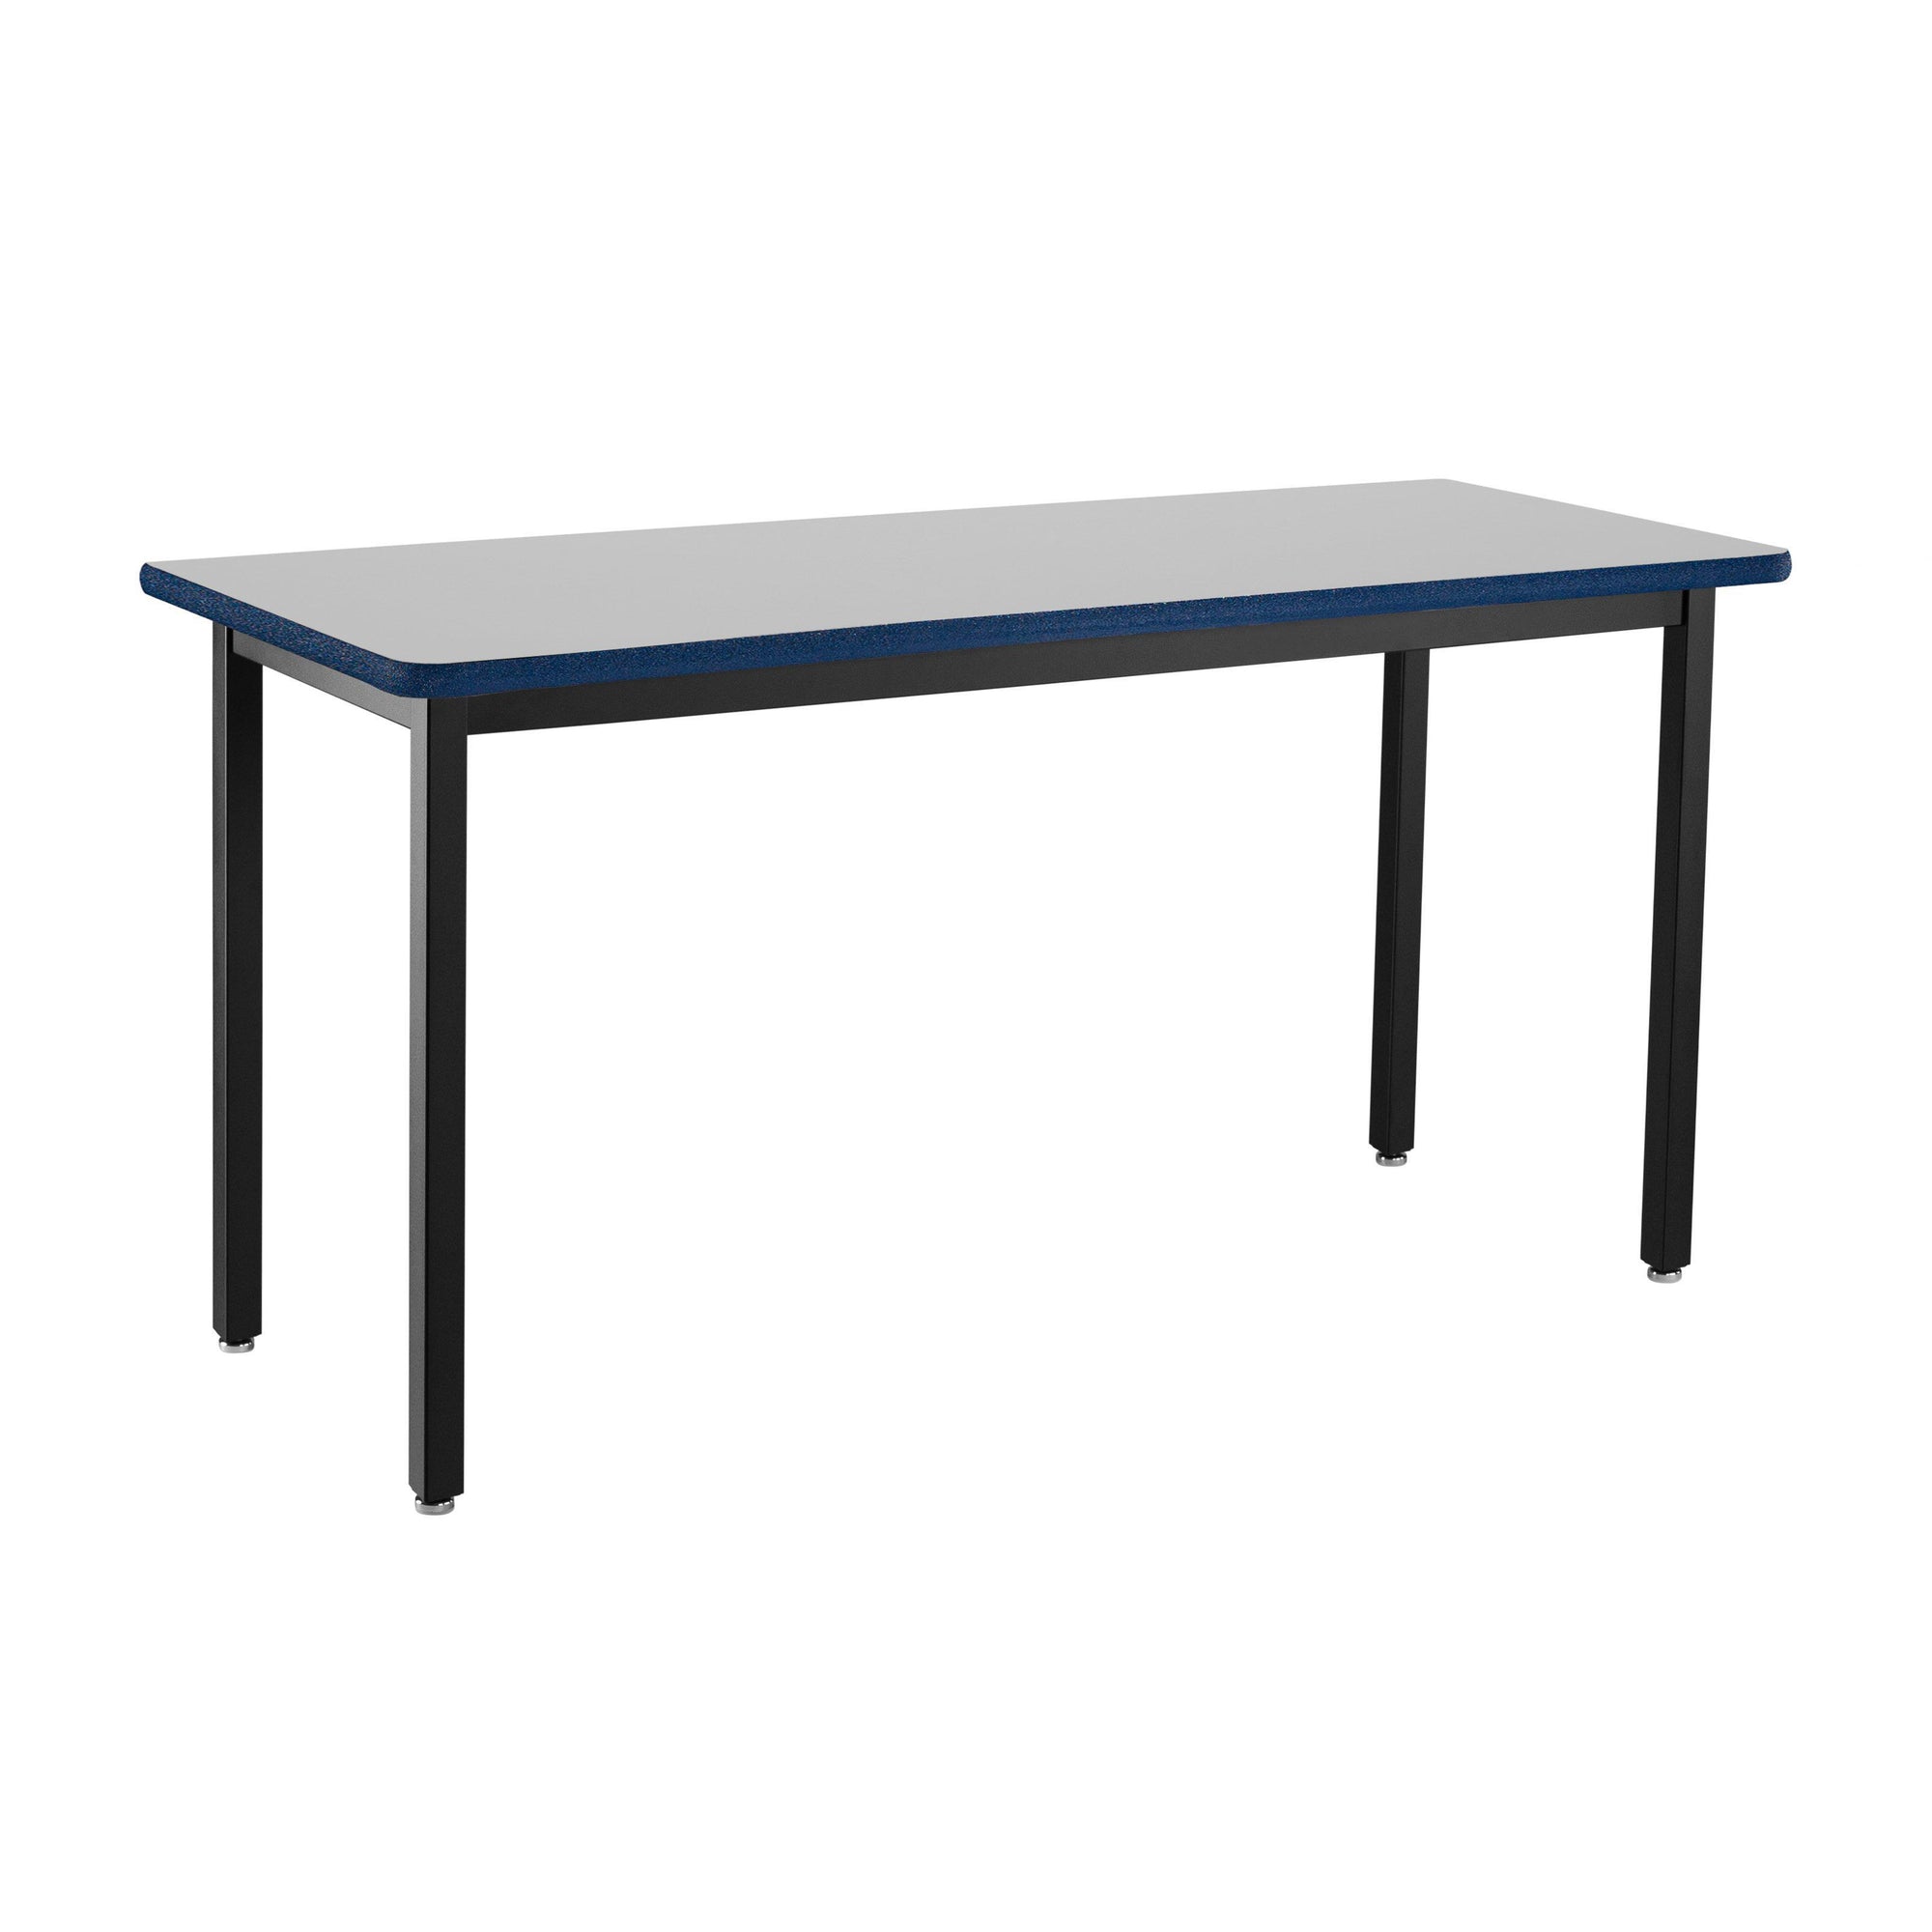 Heavy-Duty Fixed Height Utility Table, Black Frame, 30" x 42", Supreme High-Pressure Laminate Top with Black ProtectEdge